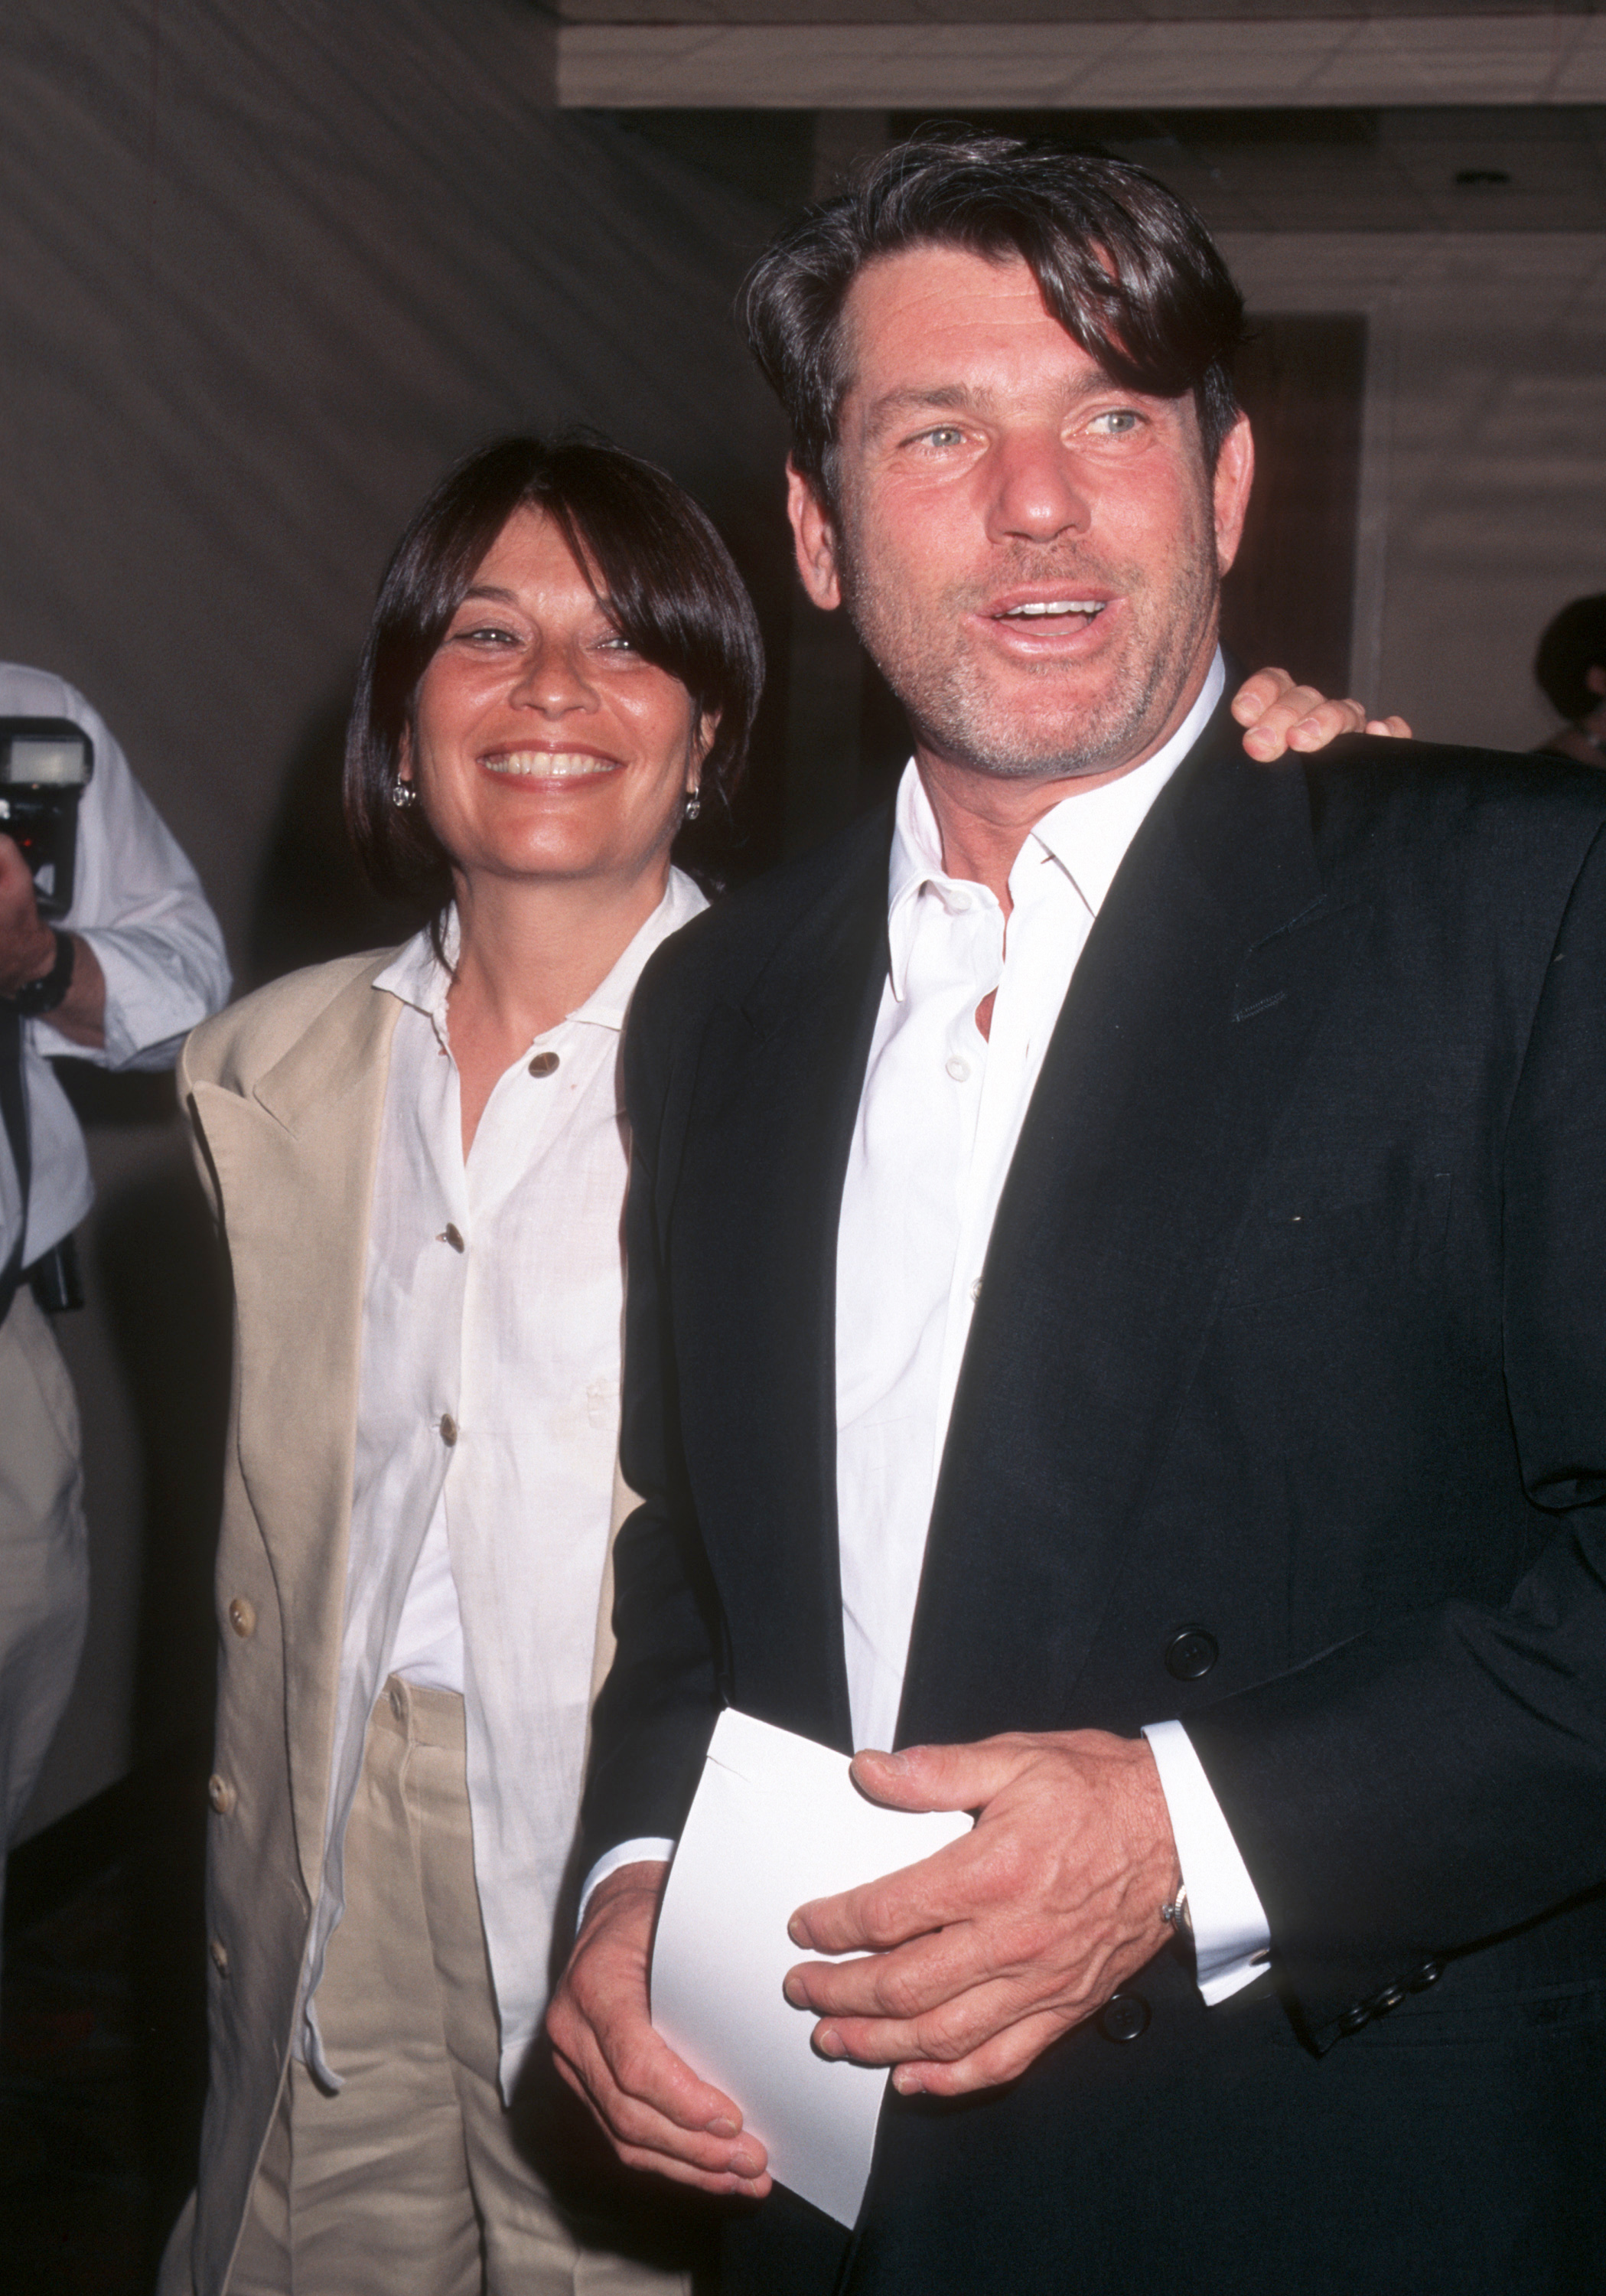 Jane Schindelheim and Jann Wenner during the "Fear and Loathing in Las Vegas" New York City Premiere at Sony Theater on May 19, 1998, in New York City. | Source: Getty Images